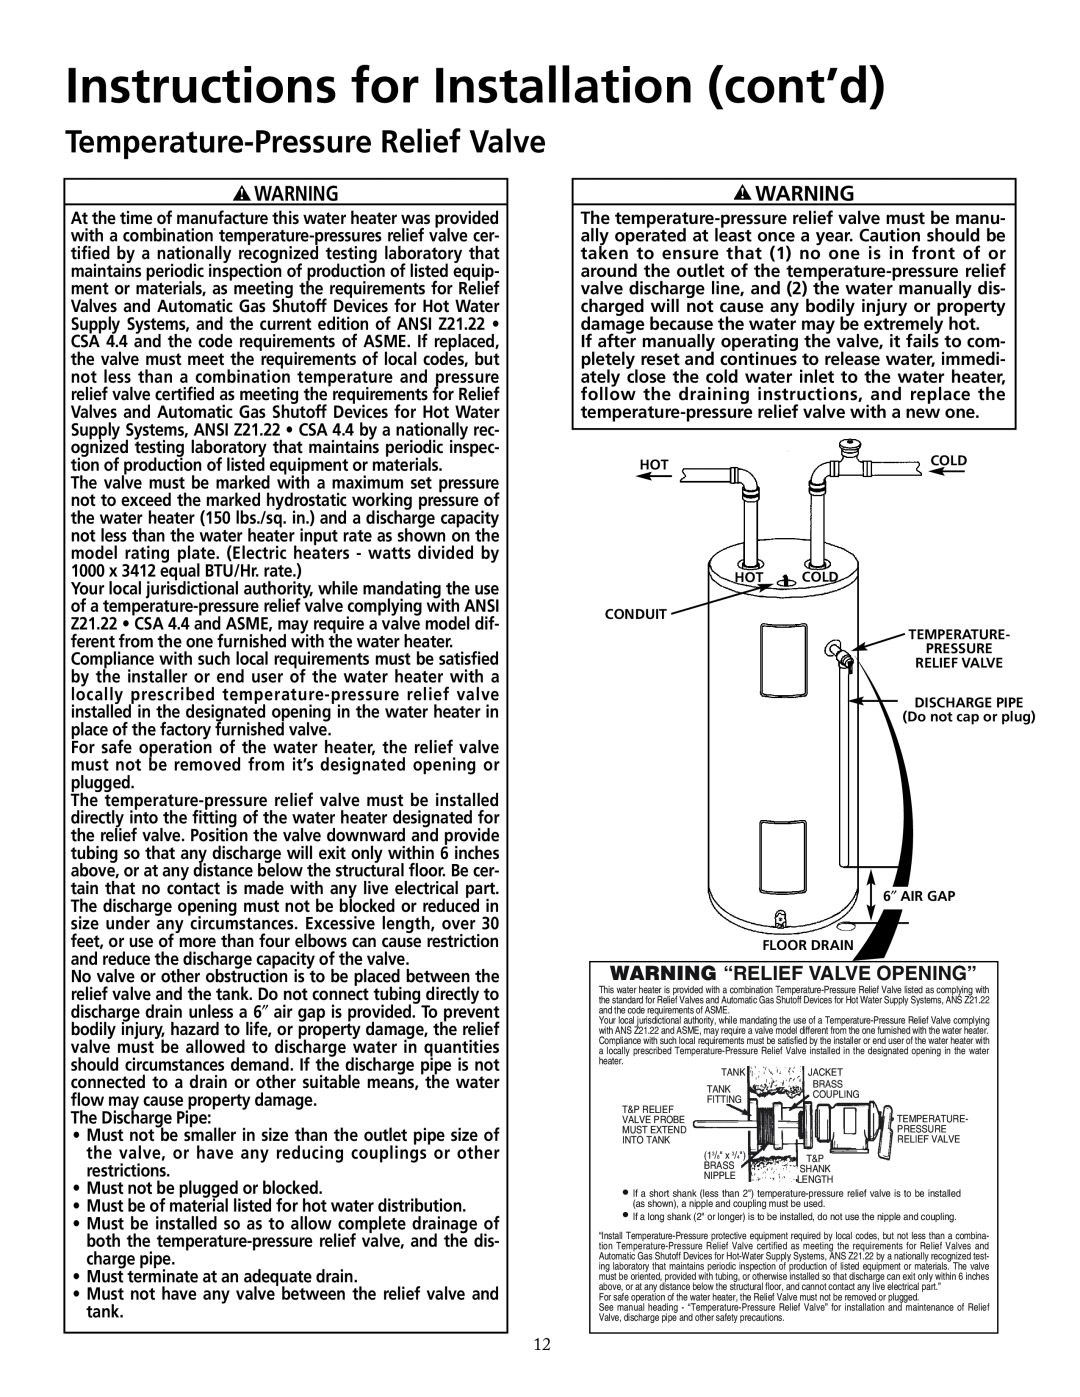 Maytag HRE2940S Temperature-PressureRelief Valve, Instructions for Installation cont’d, Warning “Relief Valve Opening” 